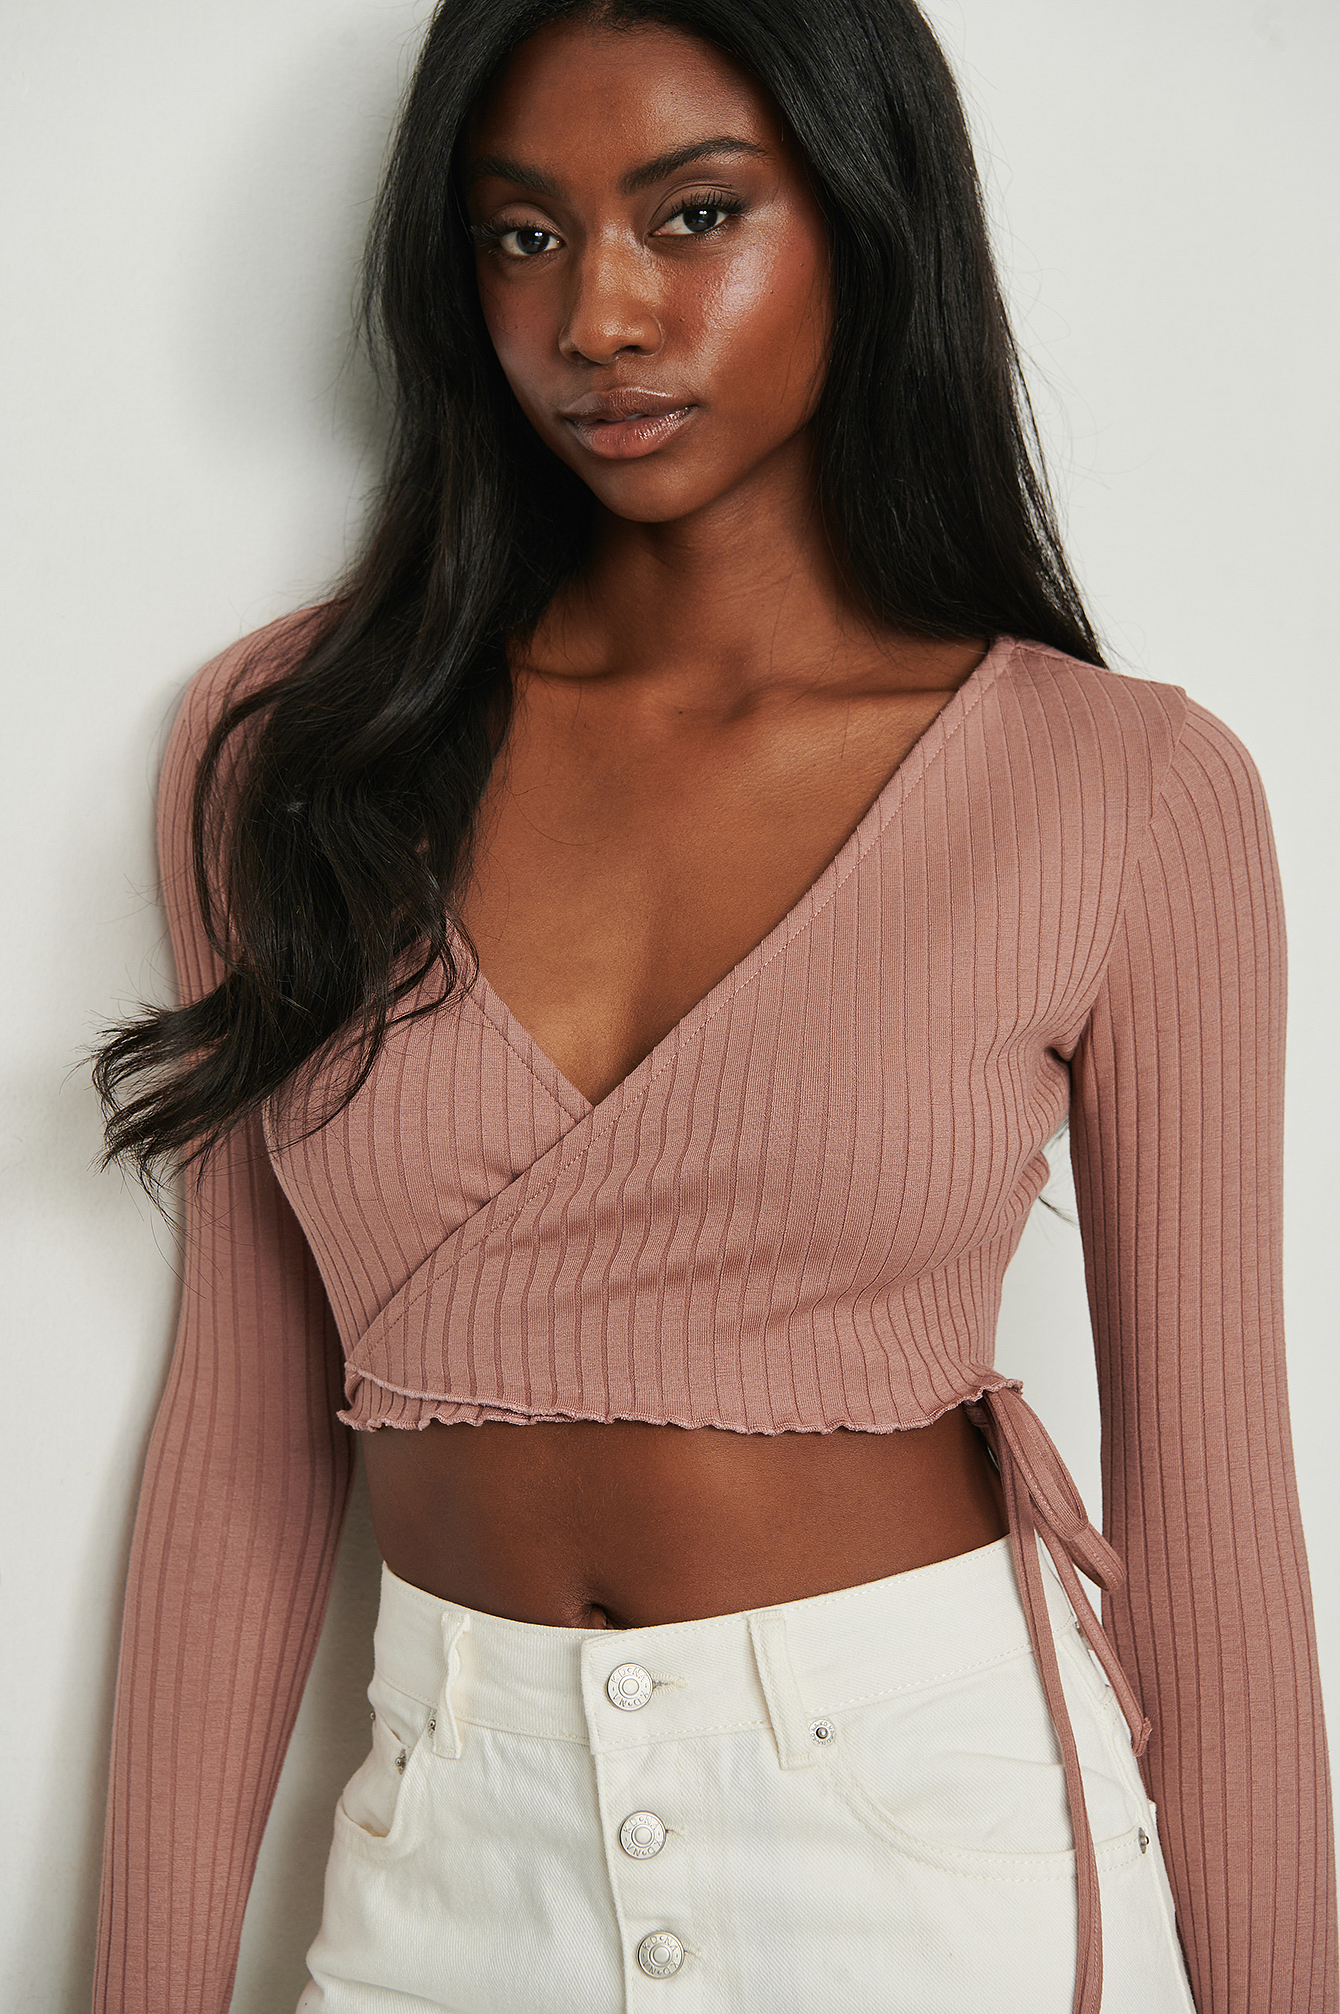 Wrap Crop Rib Top Outfit